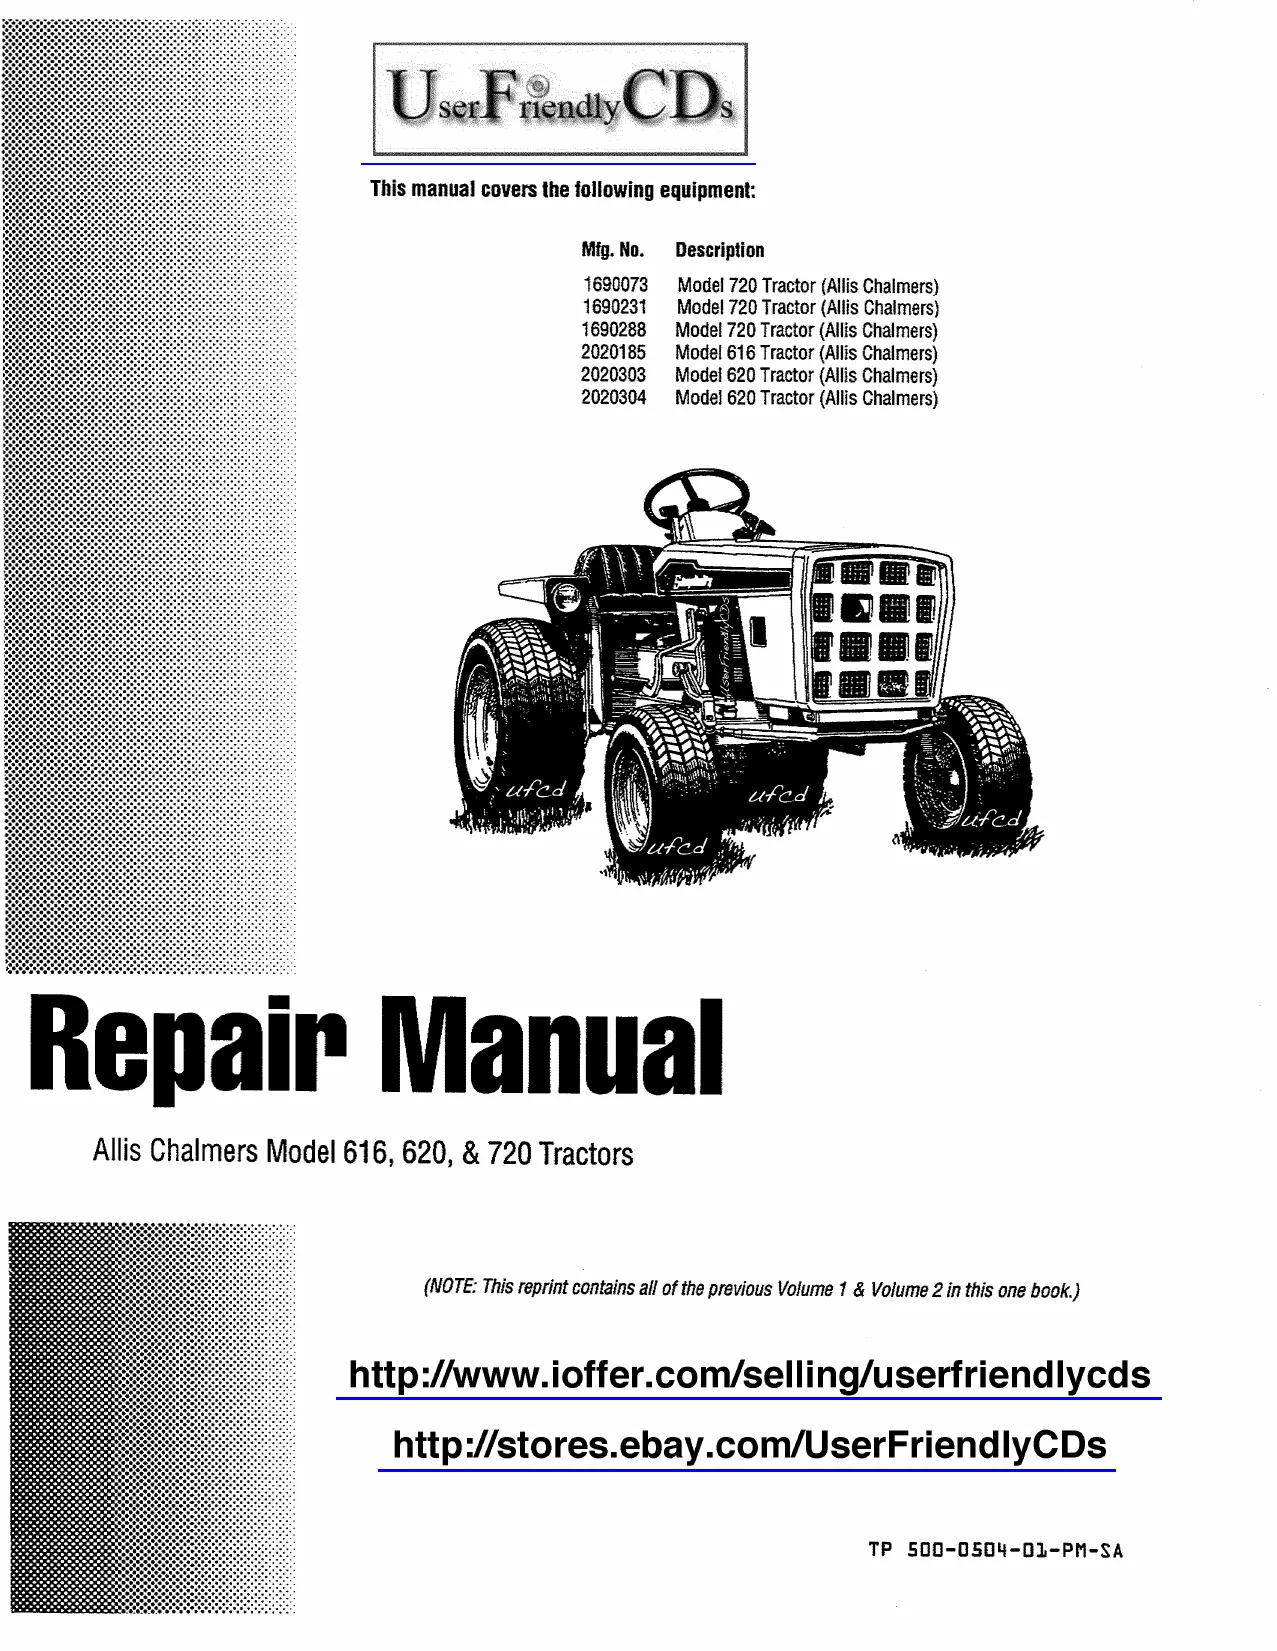 1975-1983 Allis Chalmers™ 720 tractor manual & parts list